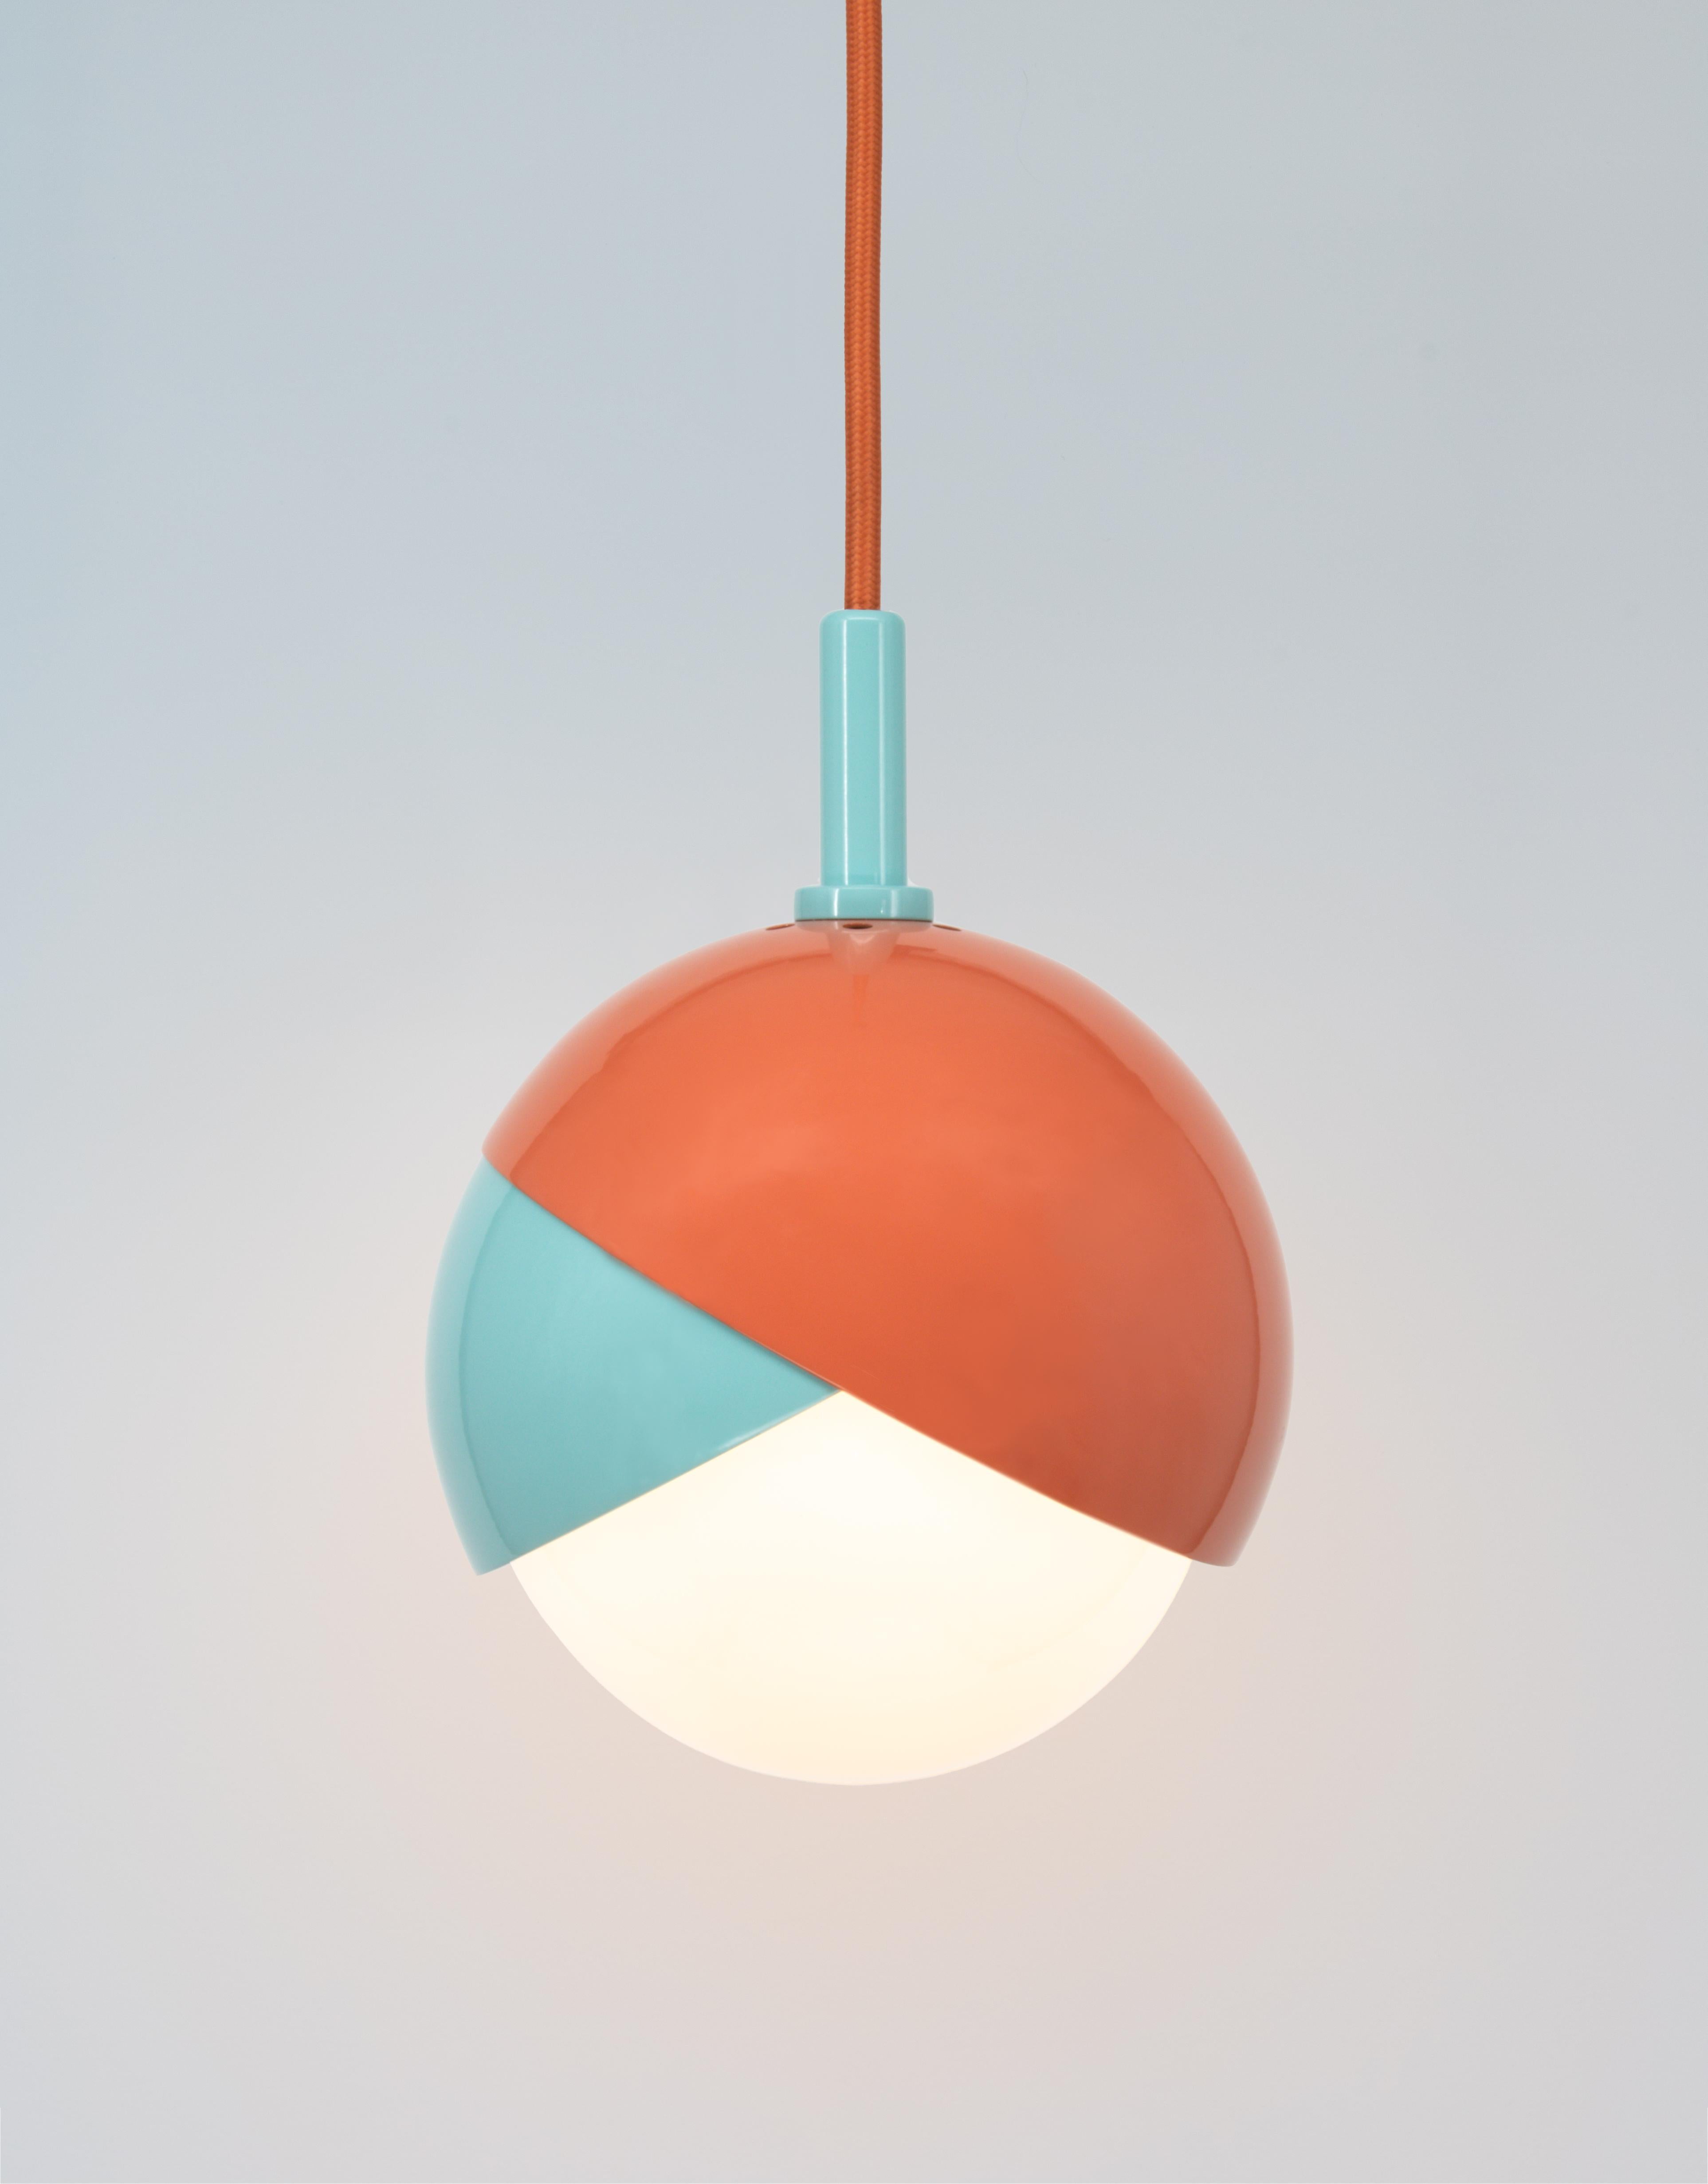 The Benedict™ color series styles our most versatile pendant light in a wide range of colorful configurations, both bright and subdued, sure to fit the mood of any project. Like all Trella™ products, our hand made lights are highly customizable, and